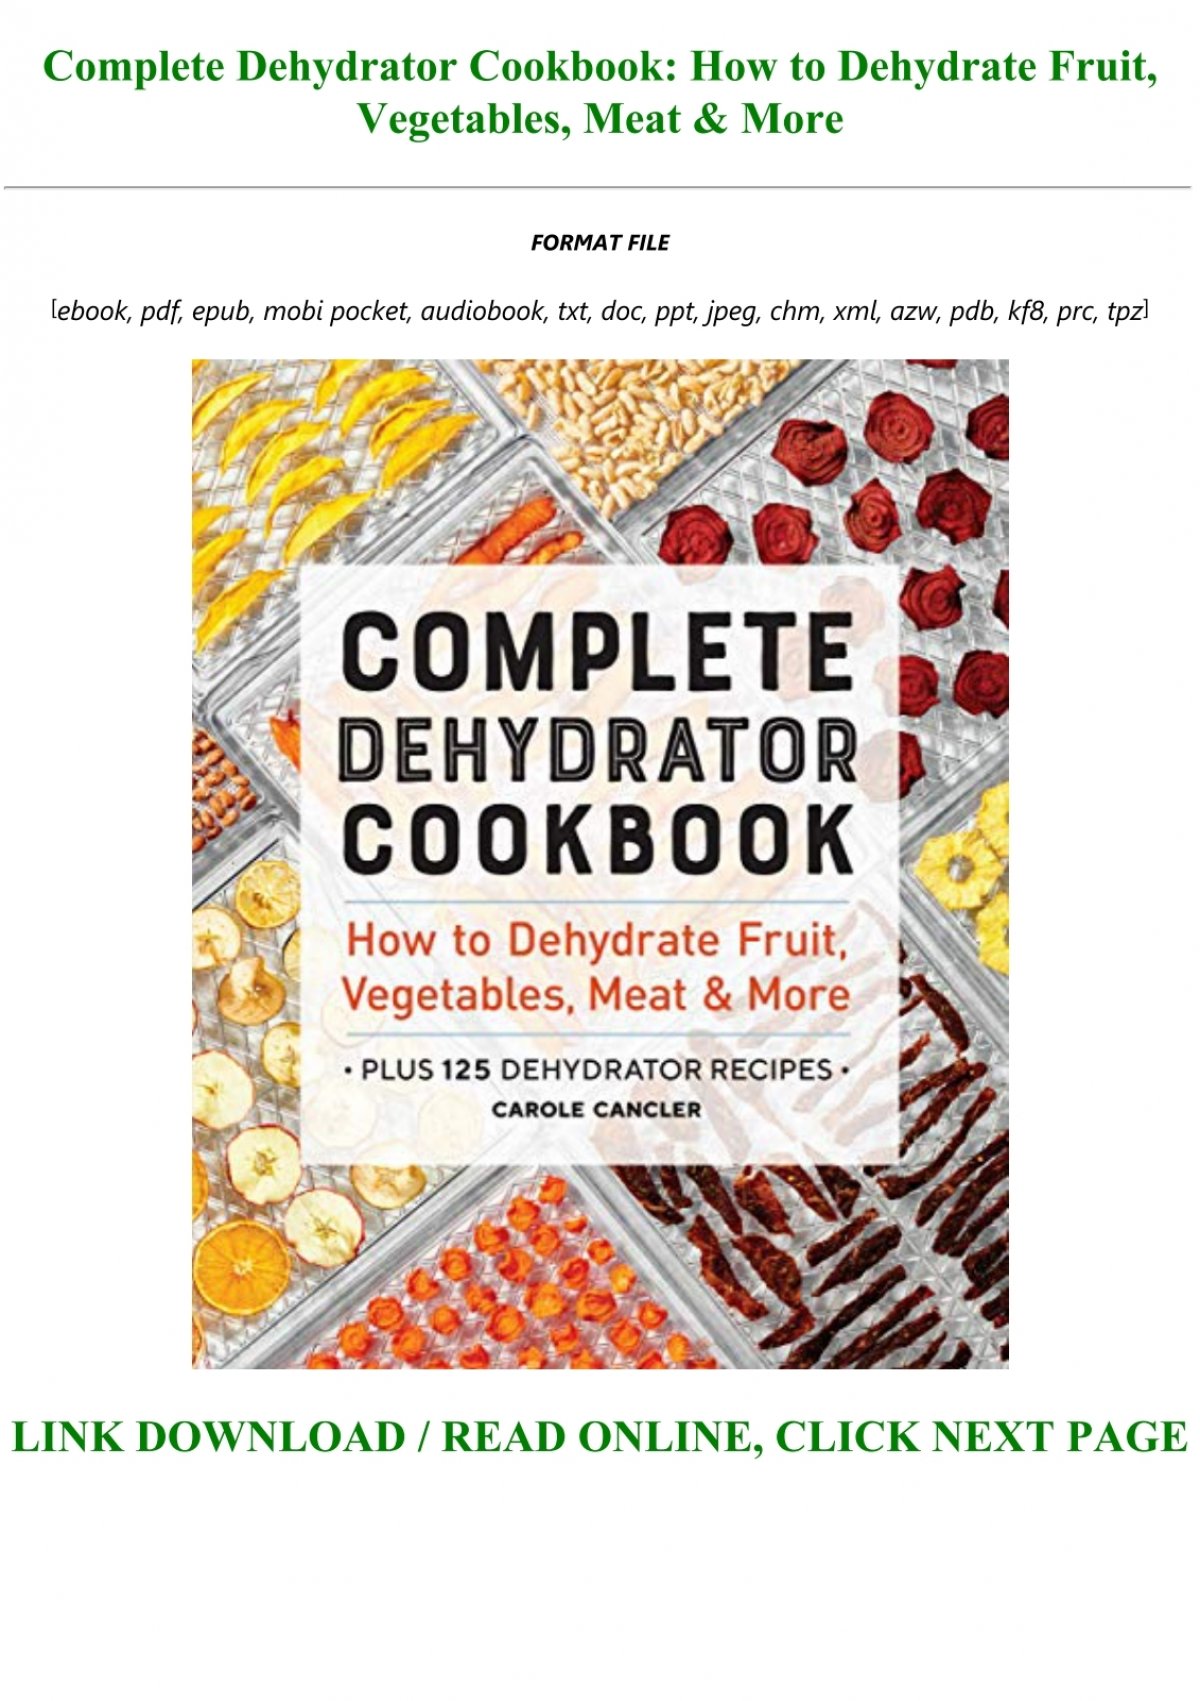 Dehydrator Cookbook for Preppers: Unlock Step-by-step Guide to Dehydrating Recipes Expert Tips For1200 Days, Including Gluten-free, Low-sodium, and Heart-healthy Dehydrating, Ensuring Total Guide [Book]